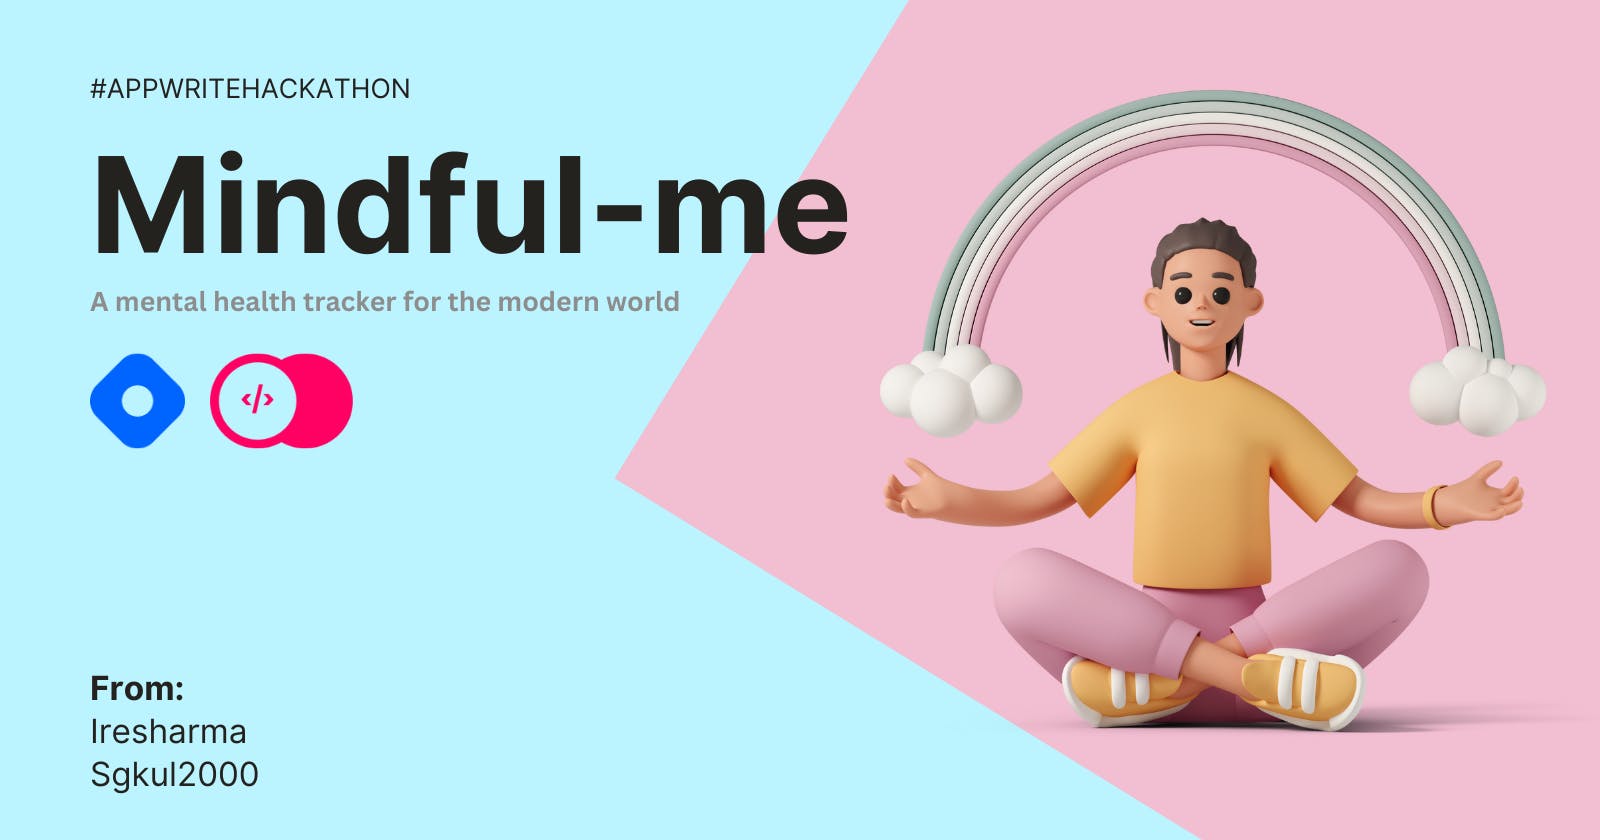 Mindful-me: A mental health tracker for the modern world